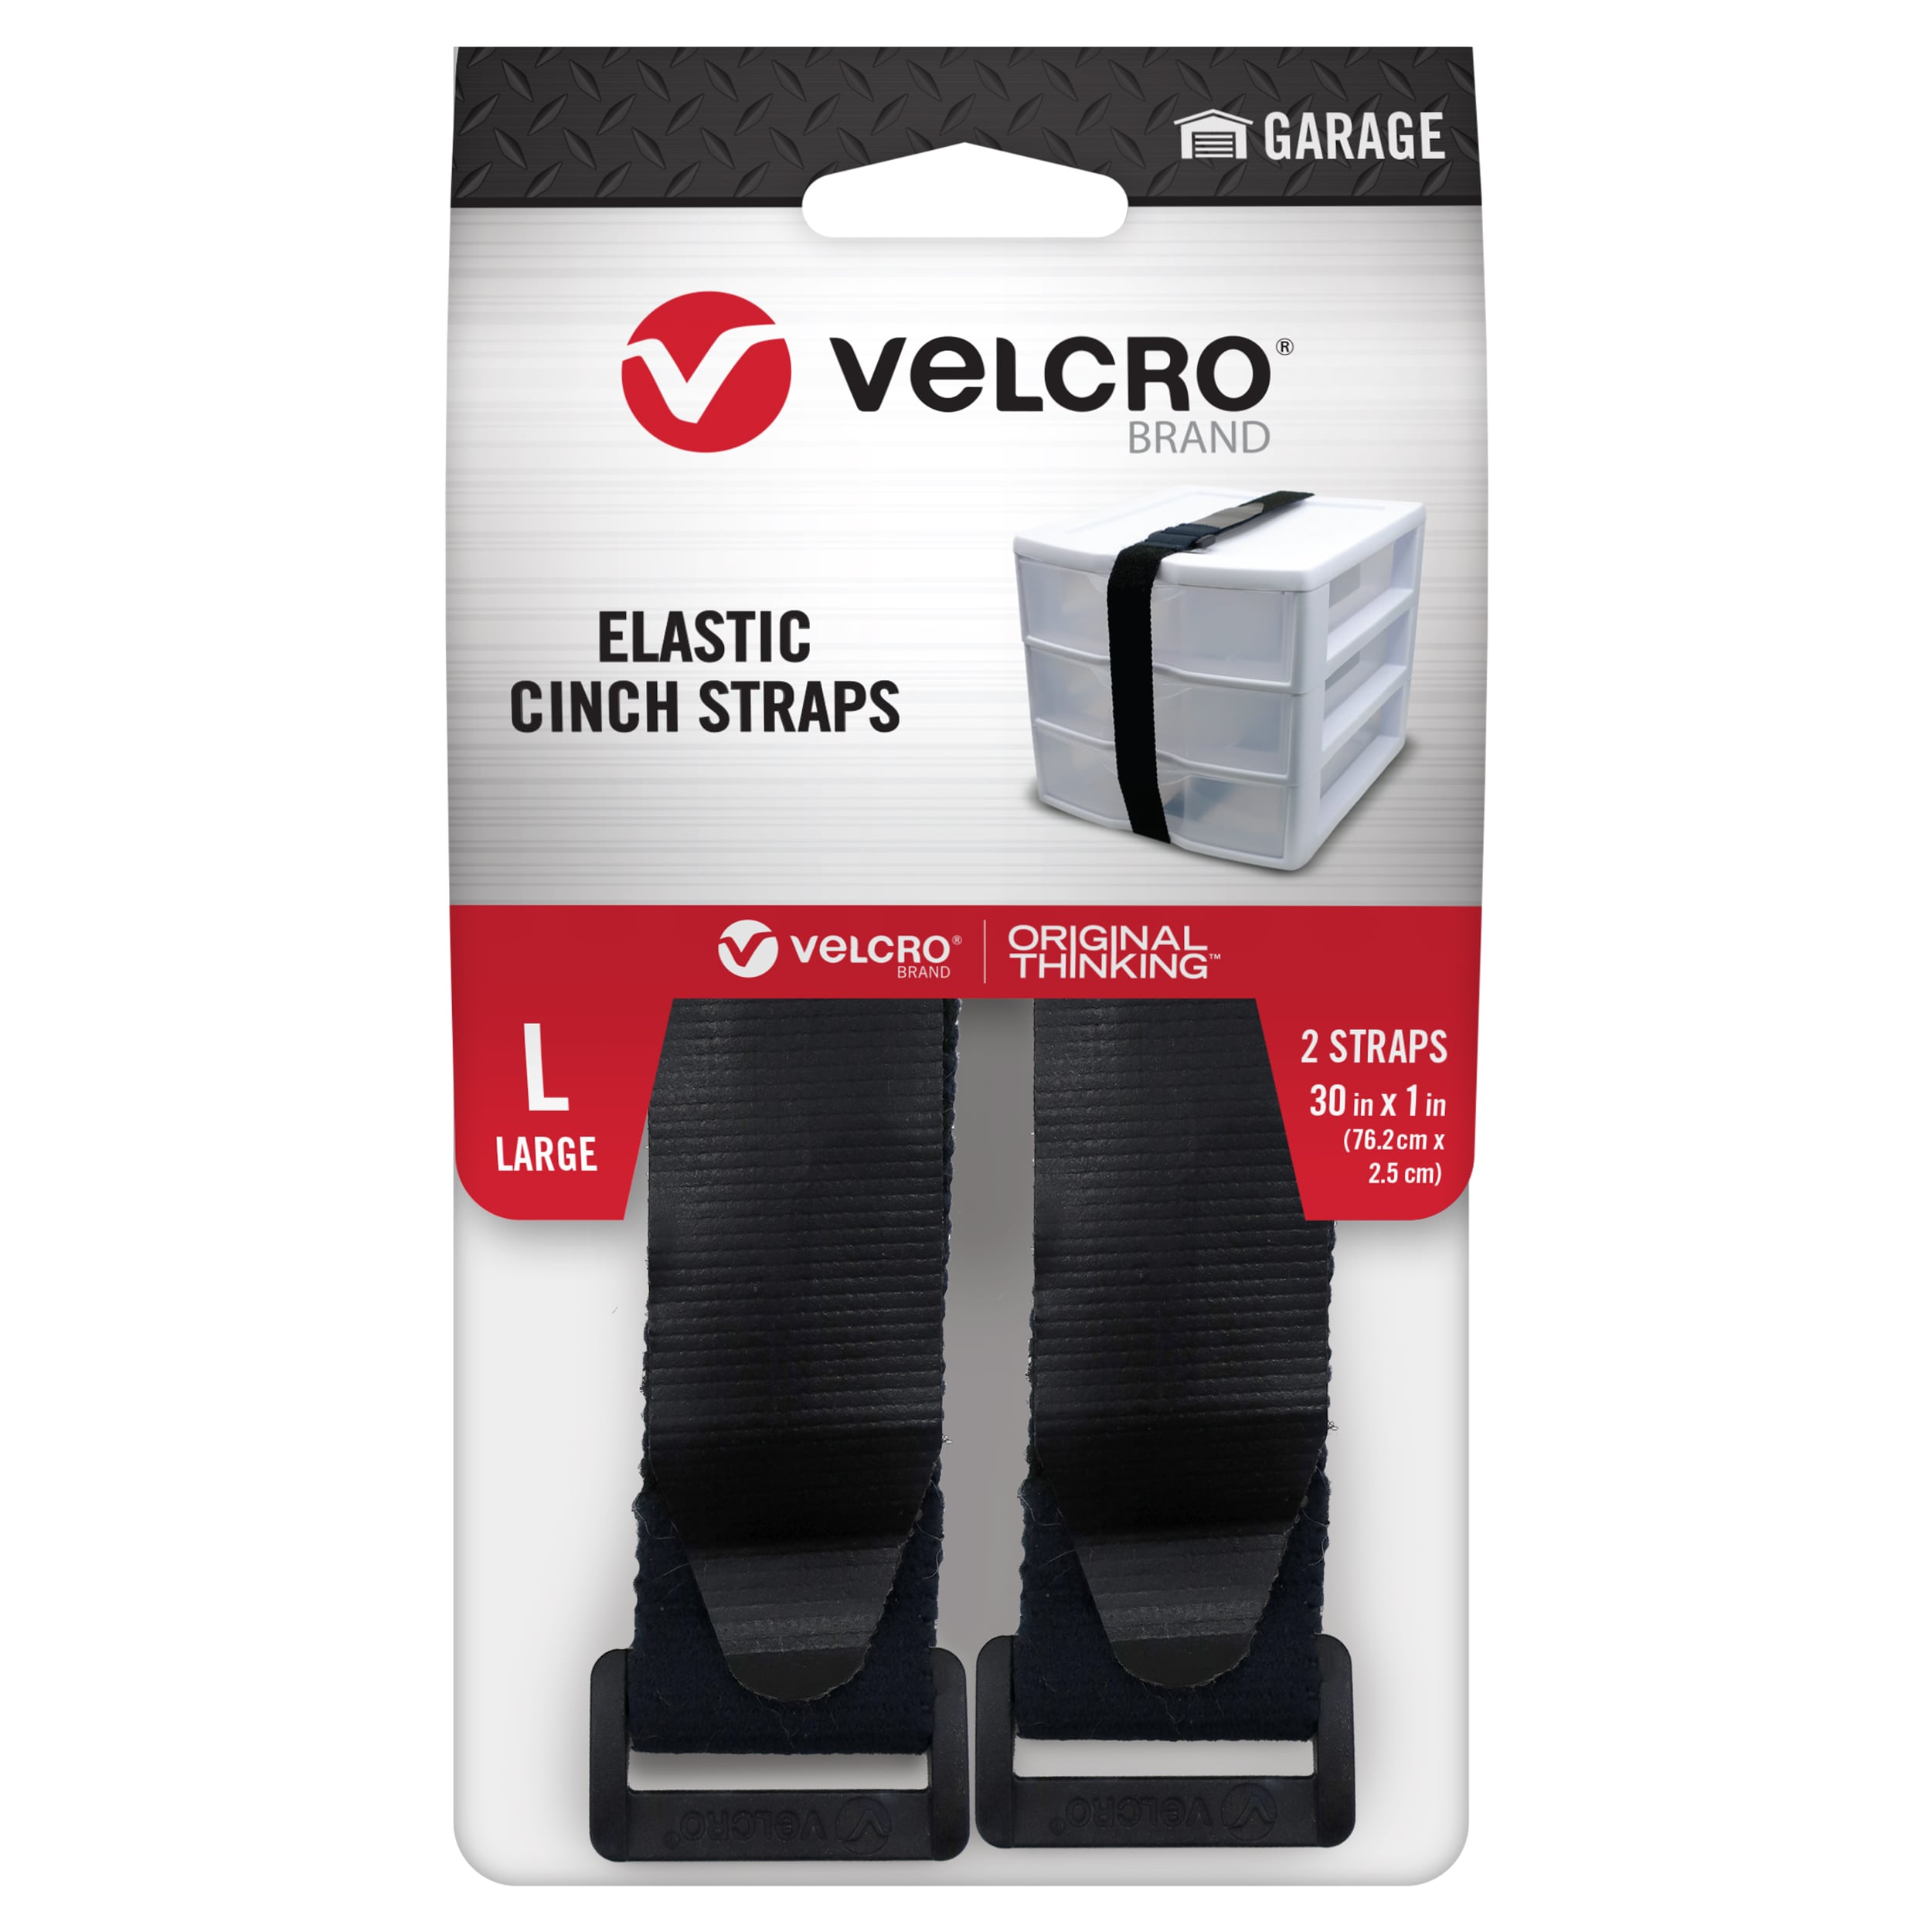 VELCRO Brand VEL-30791-AMS Elastic Cinch Straps with Buckle | 8in x 1in, Pk  of 4 | Fully Adjustable and Stretch for Snug Fit | for Fastening Power